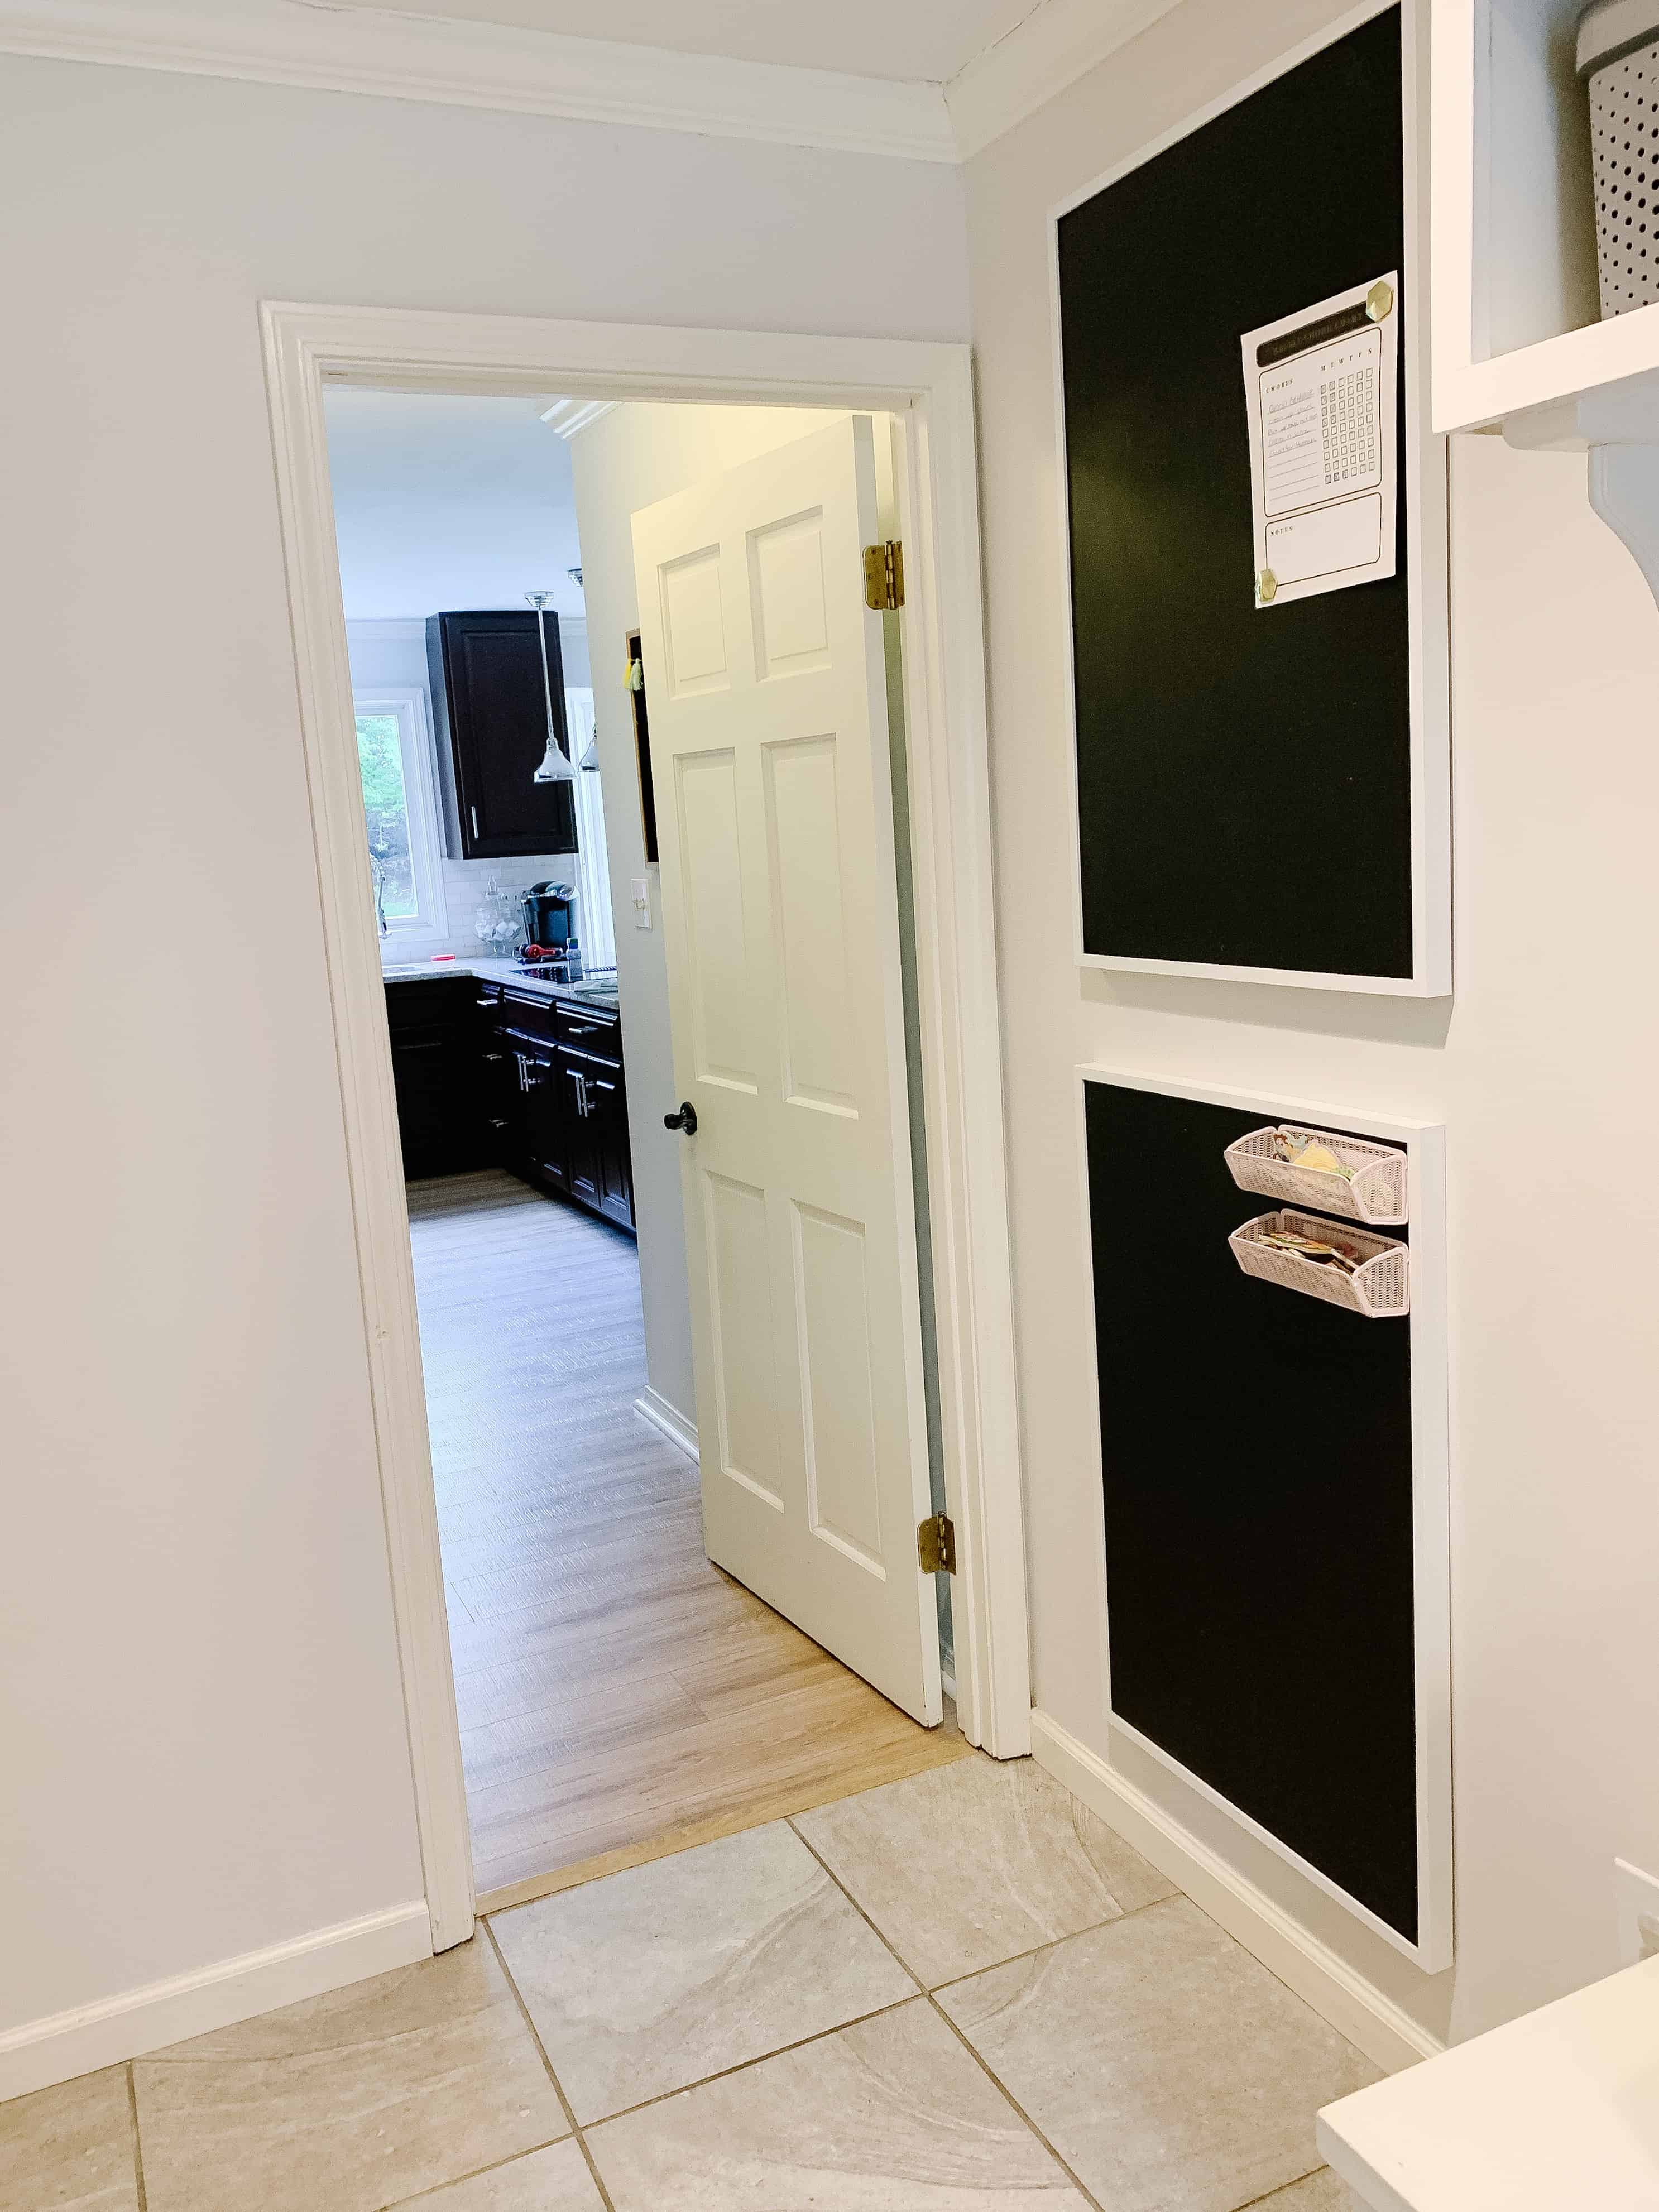 Laundry room with framed chalkboards